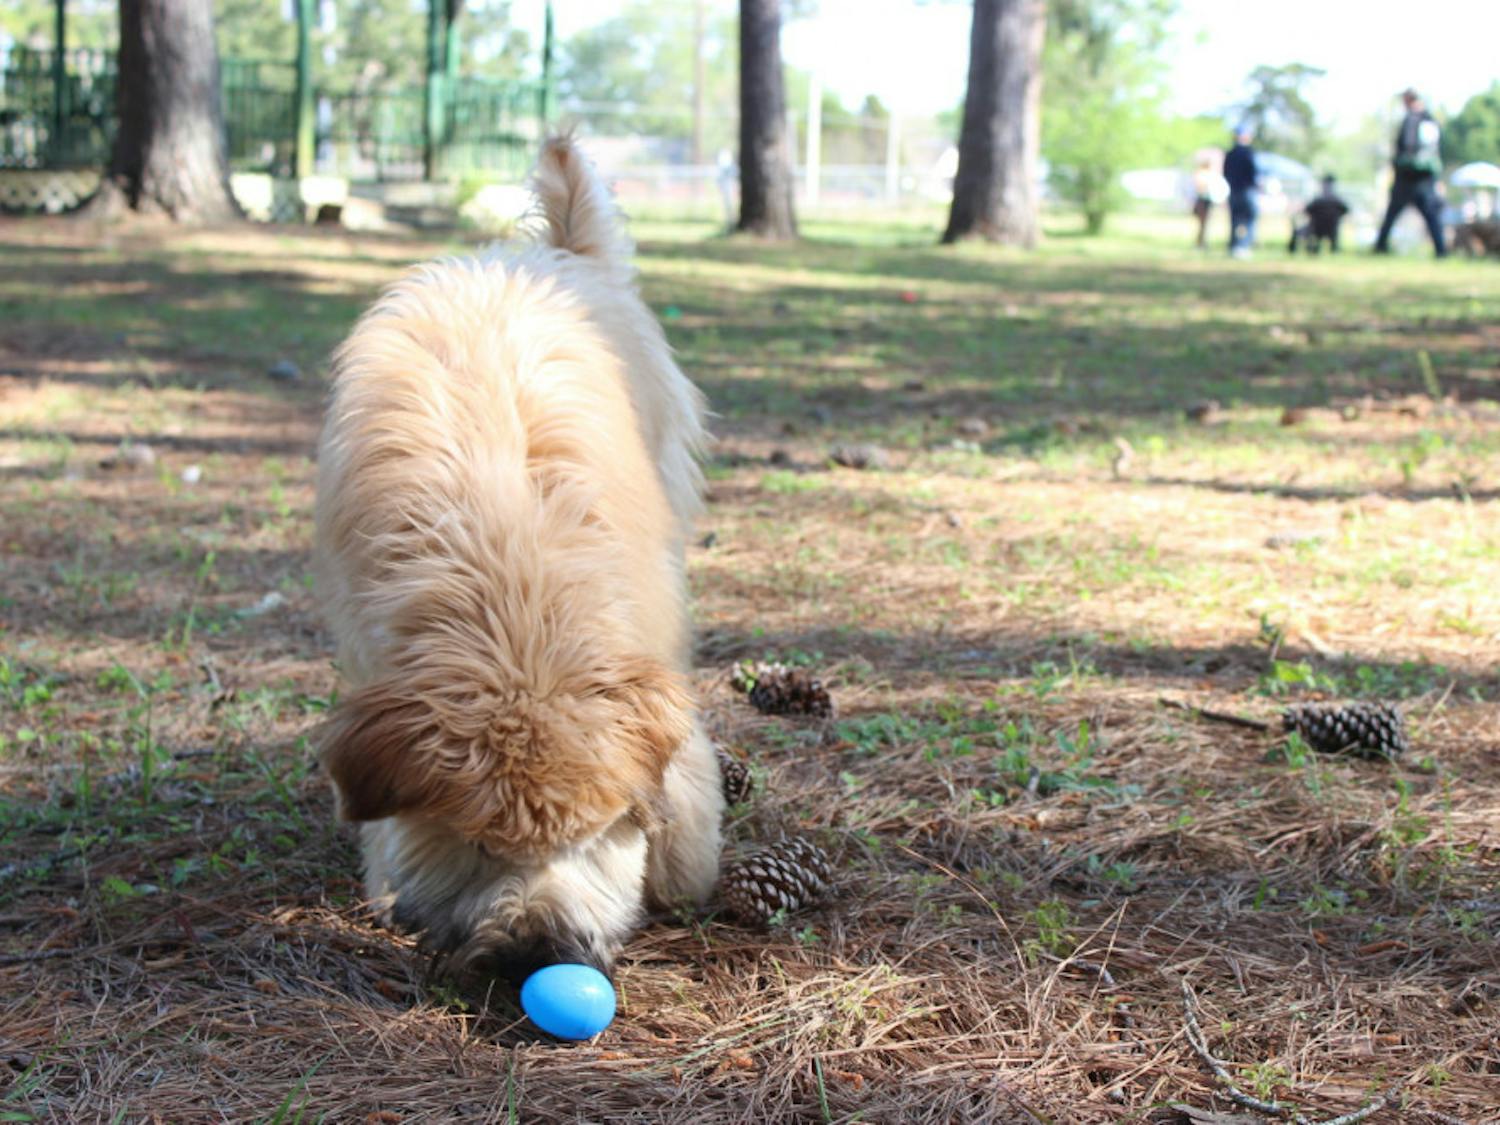 Luna, a soft-coated wheaten terrier, is trying to locate the treat hidden inside the plastic egg. She was one of more than 50 pups who attended the Easter egg hunt at Dogwood Park &amp; Daycare Saturday.